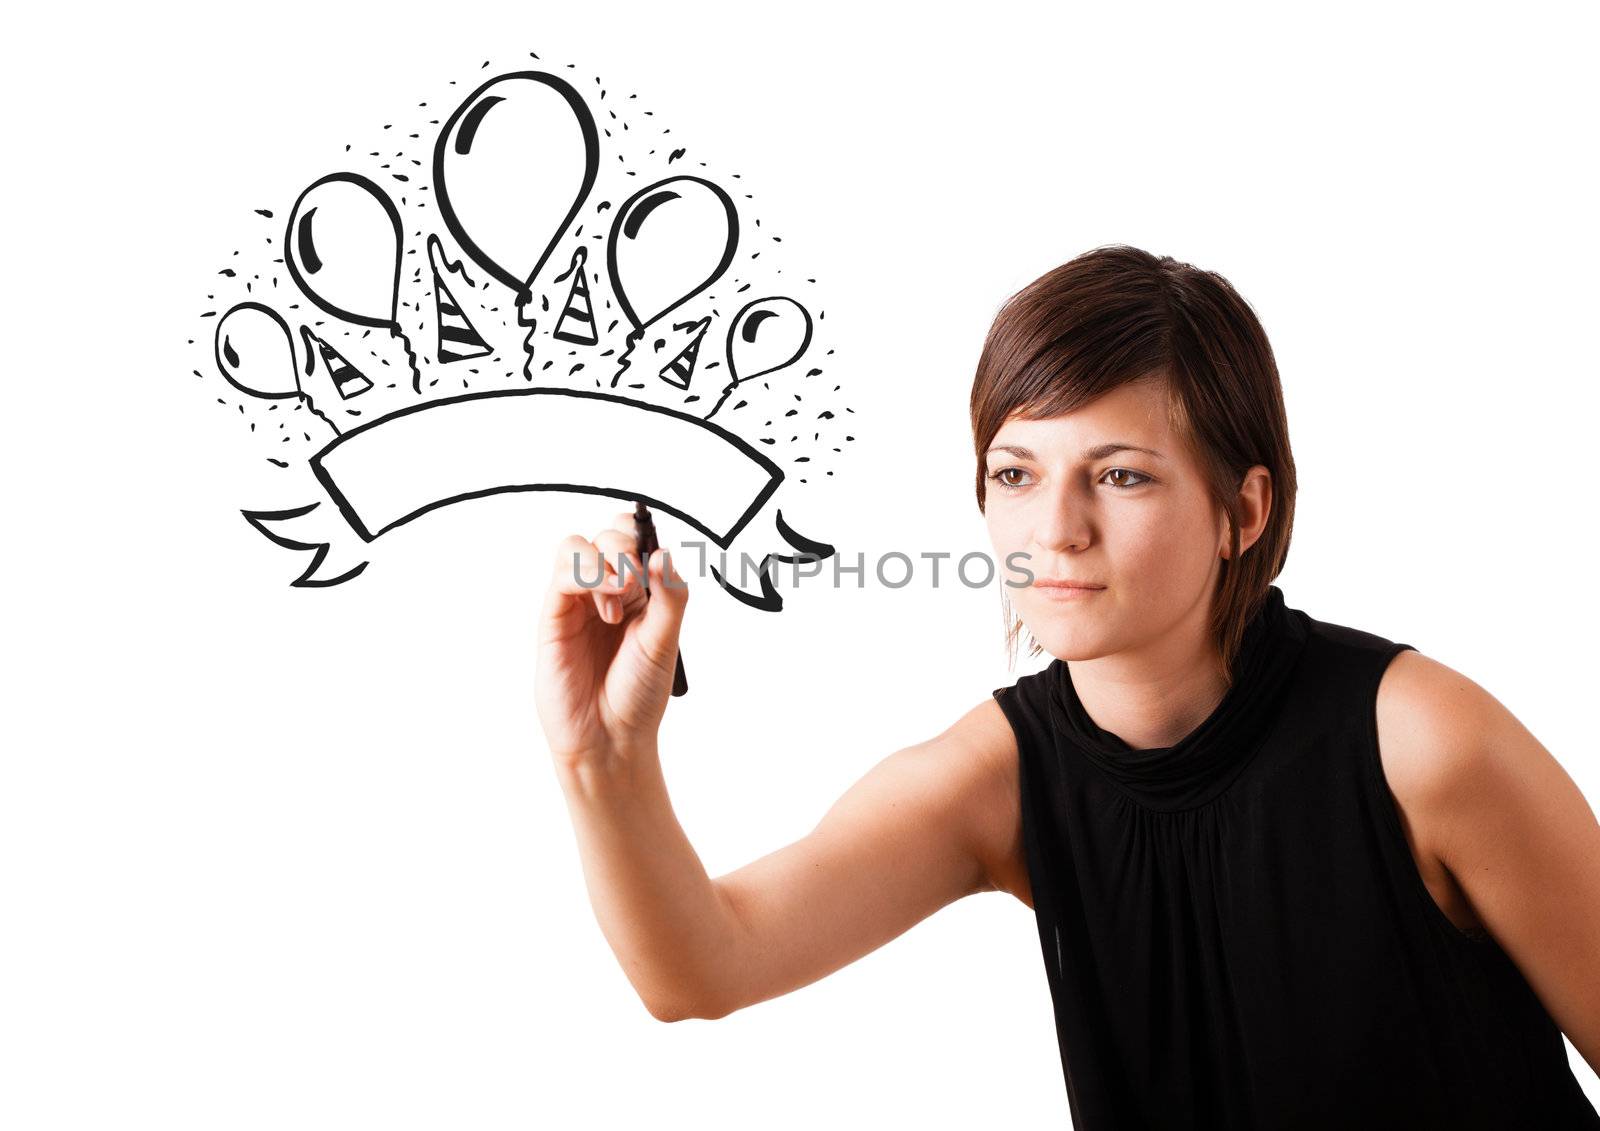 Young girl drawing a party label on whiteboard with copyspace